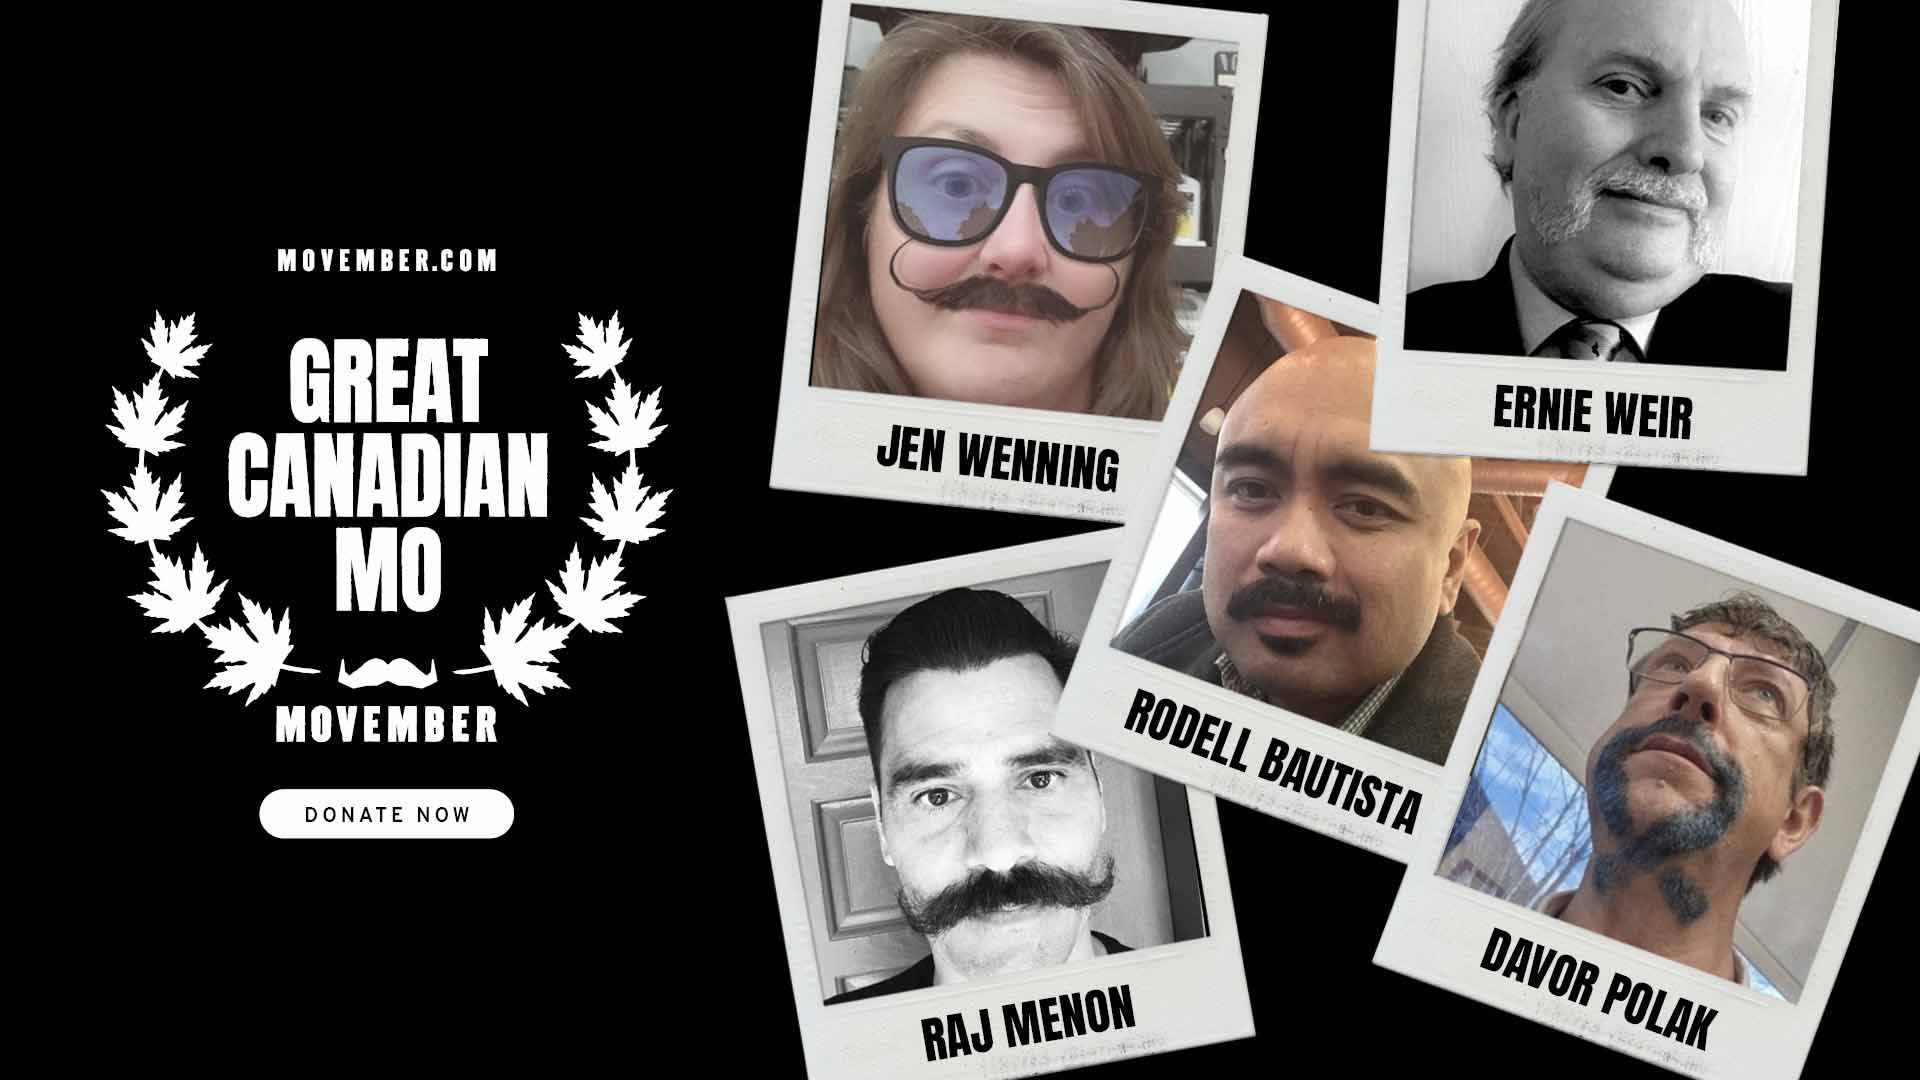 Composite image showing five photos of Movember supporters sporting spectacular moustaches. Adjacent text says: "Great Canadian Mo"